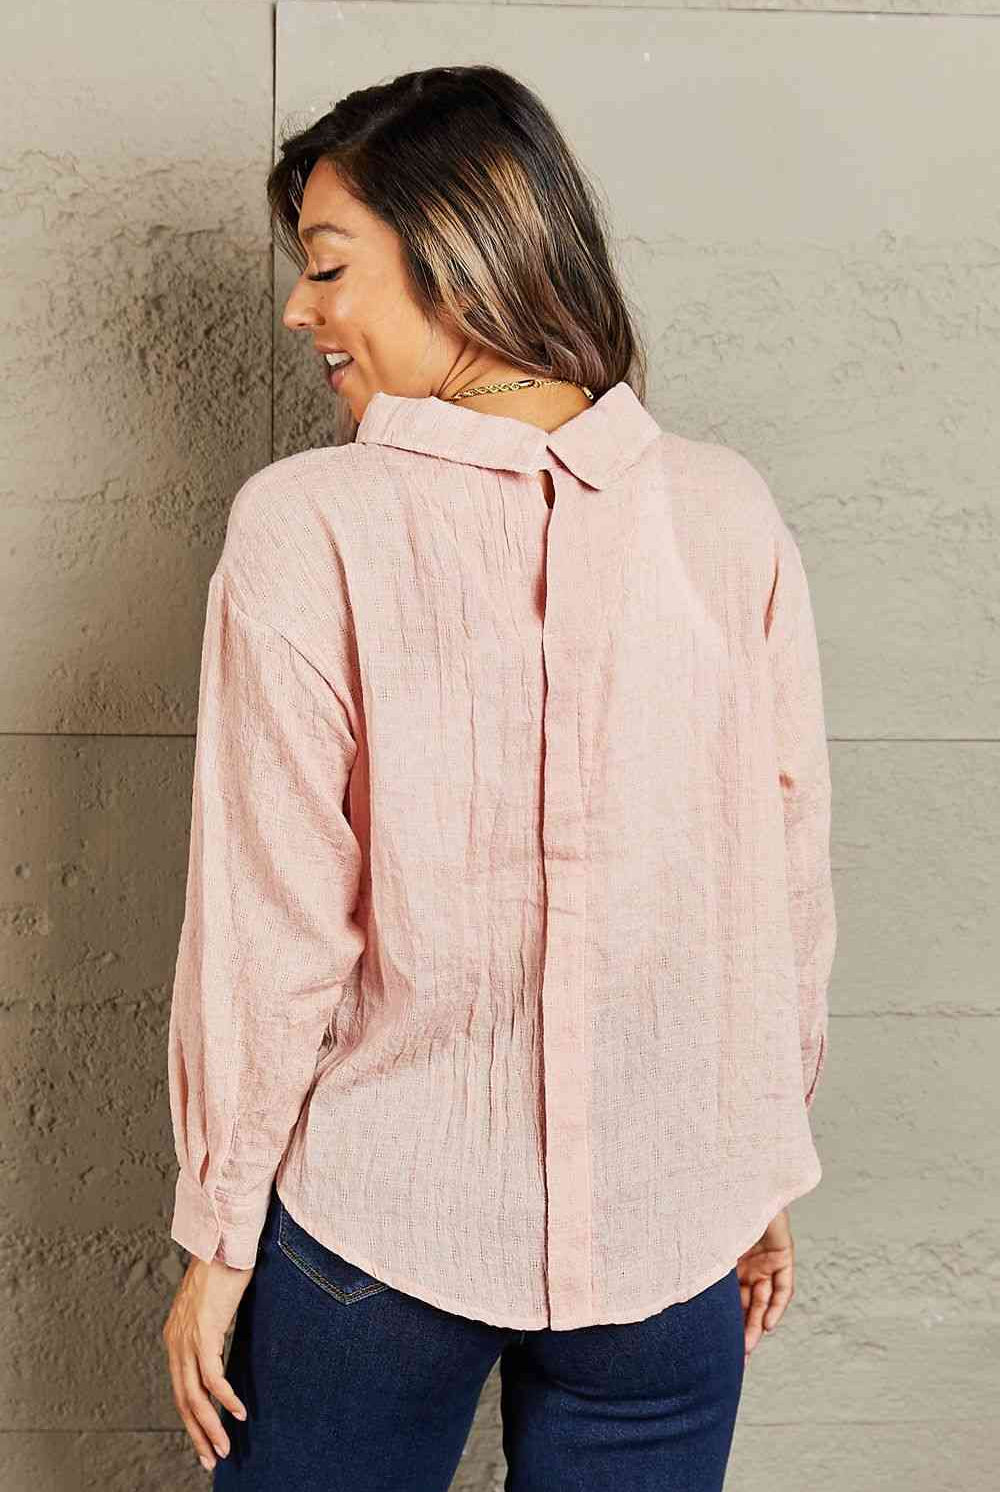 Gray Petal Dew Take Me Out Lightweight Button Down Top Clothing